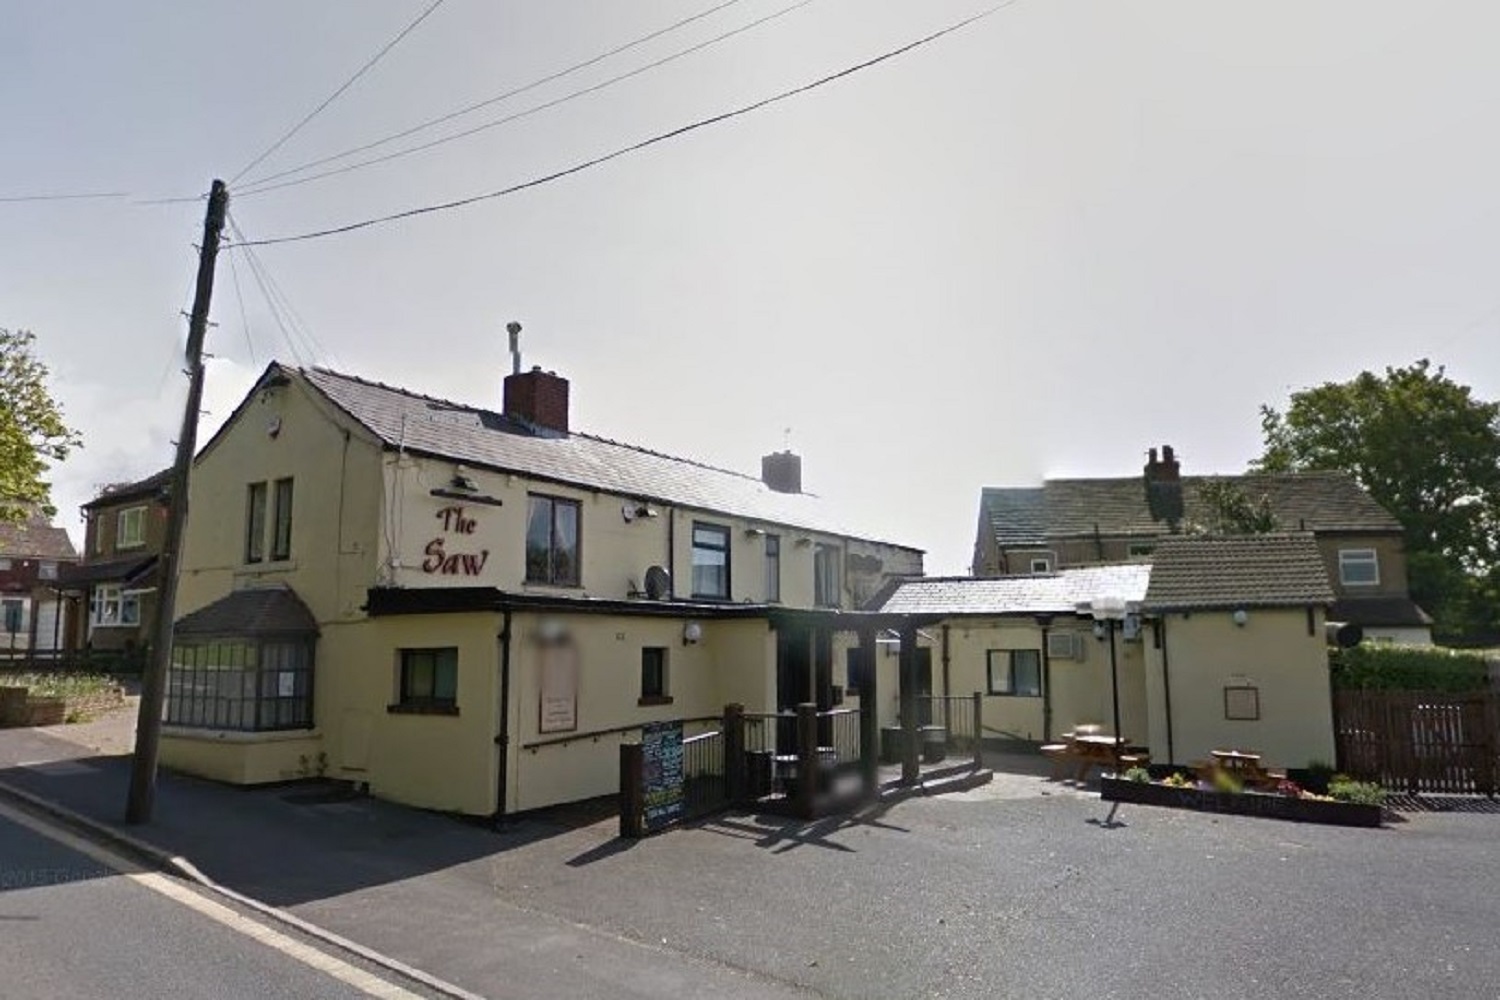 Gomersal pub, Old Saw Inn, could be converted to houses